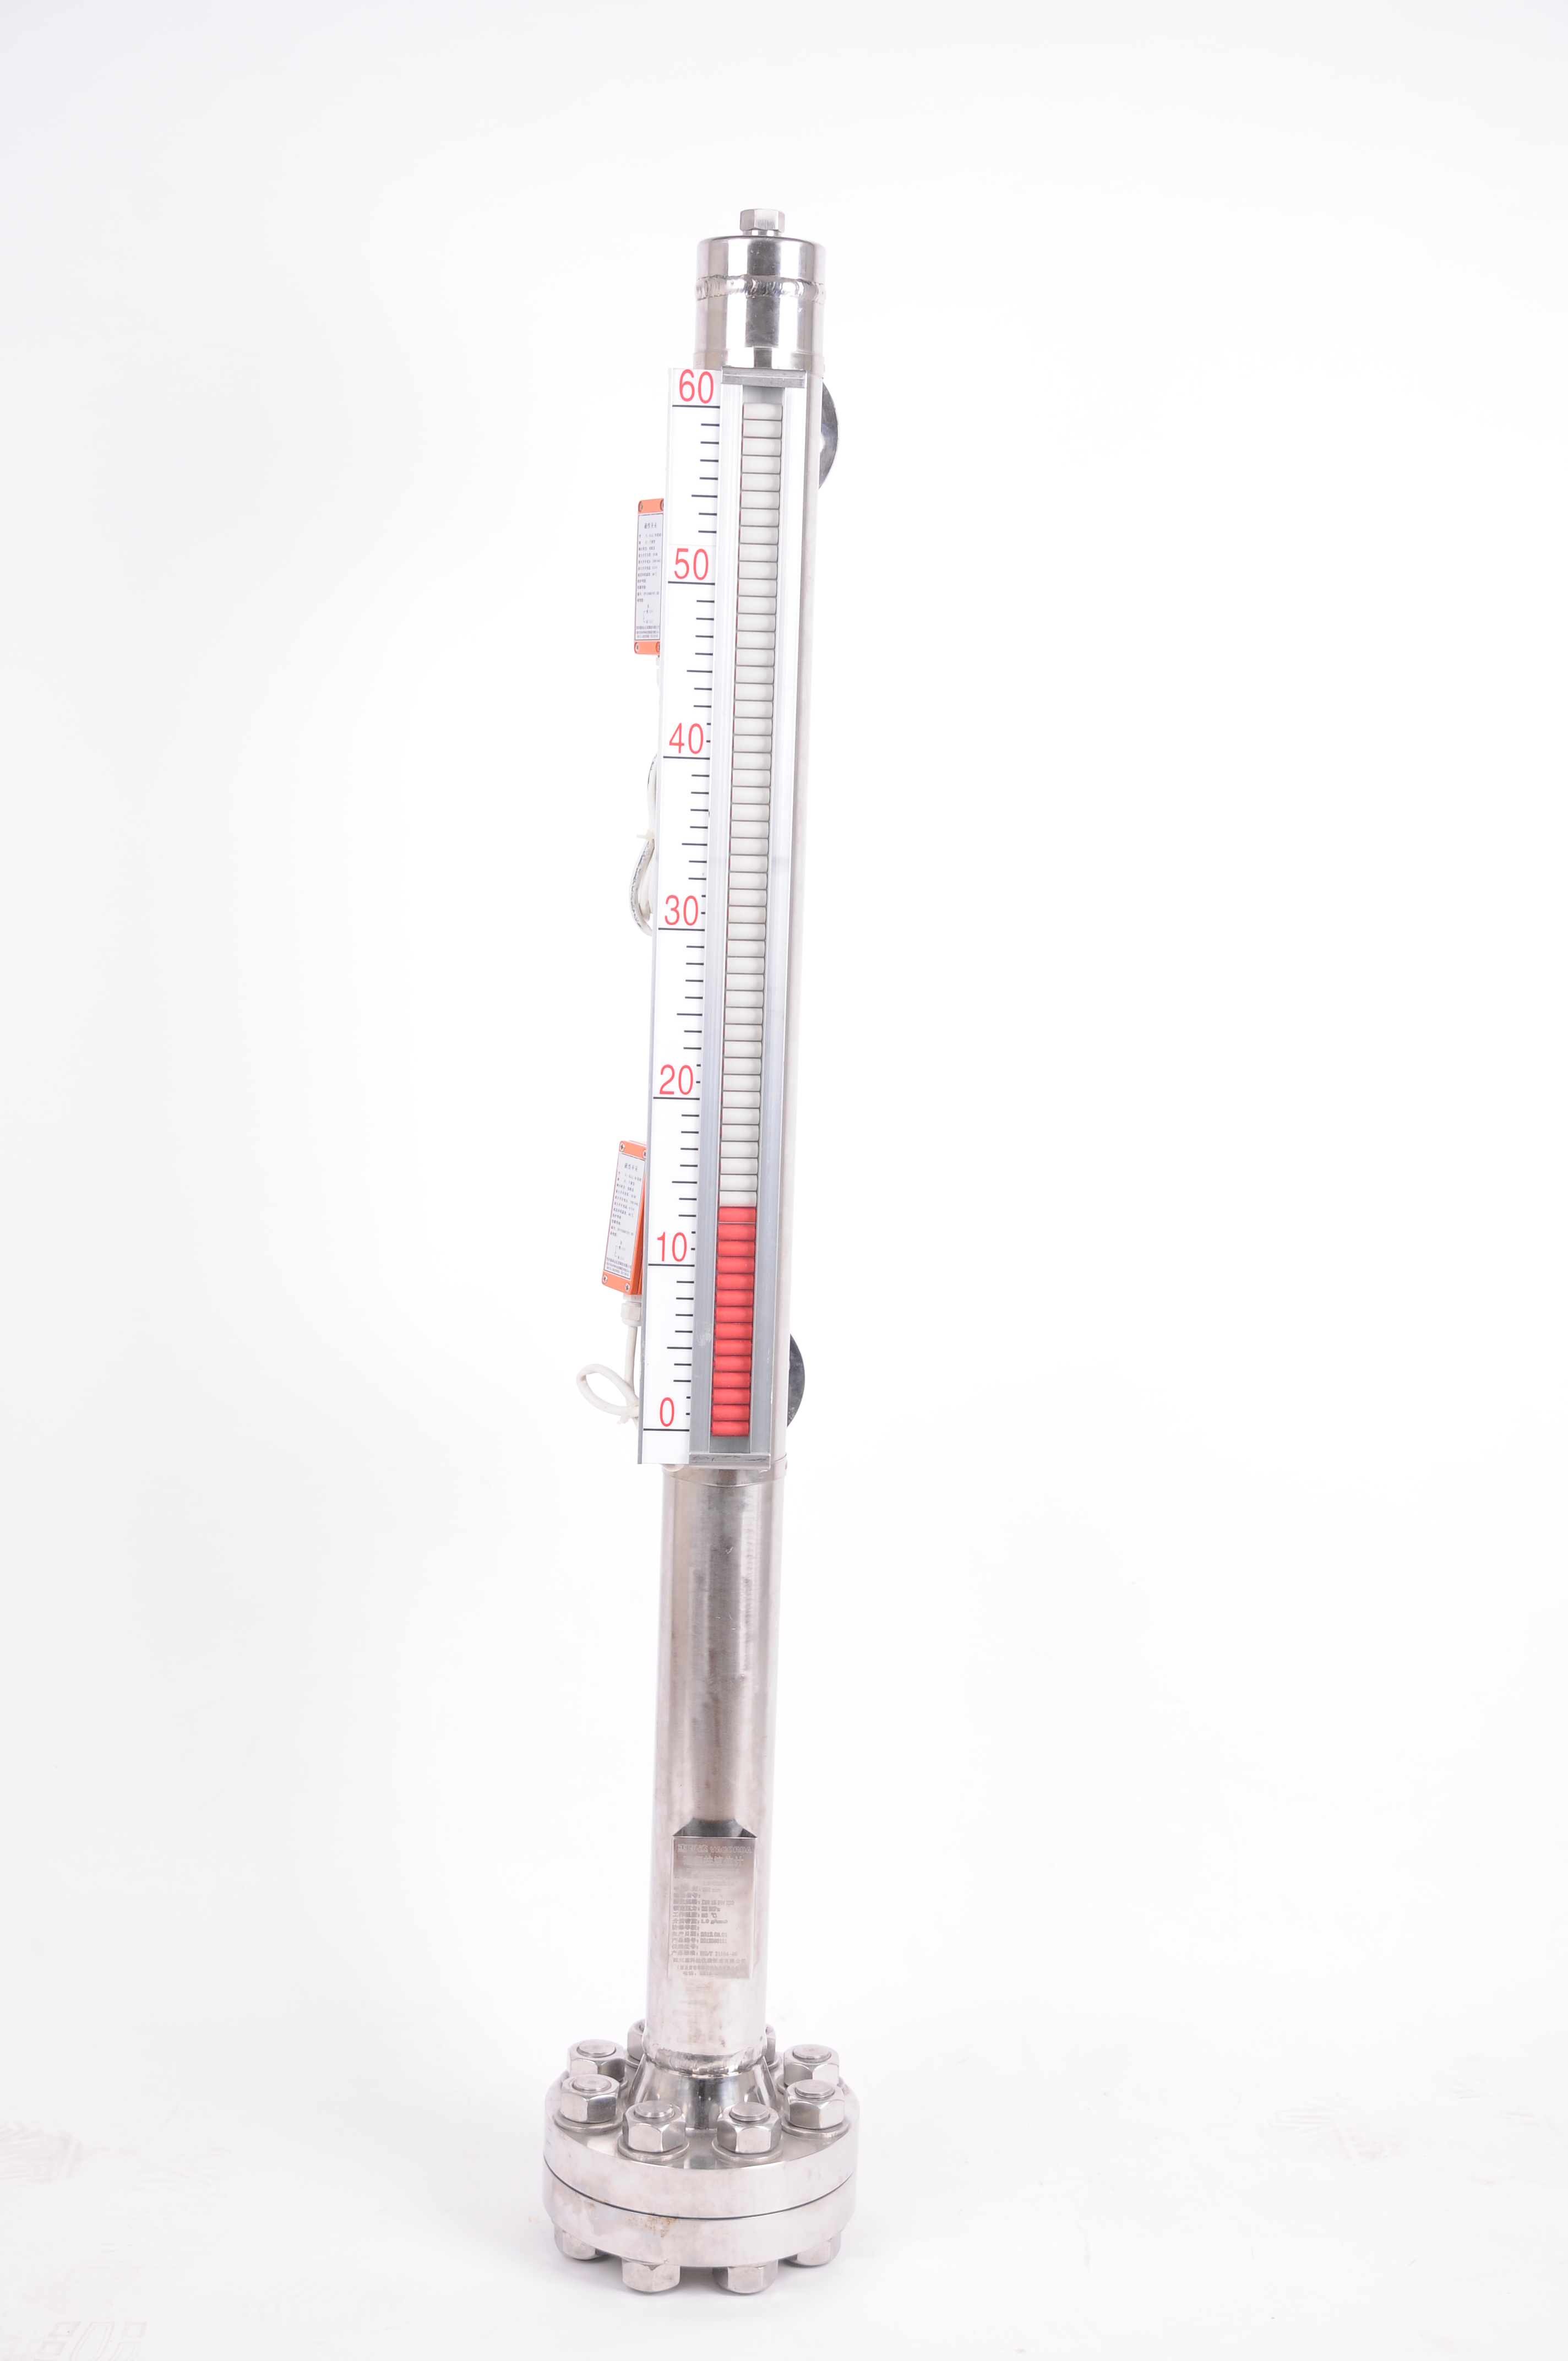 What is the reason for the inaccurate measurement of the remote magnetic flap level gauge?